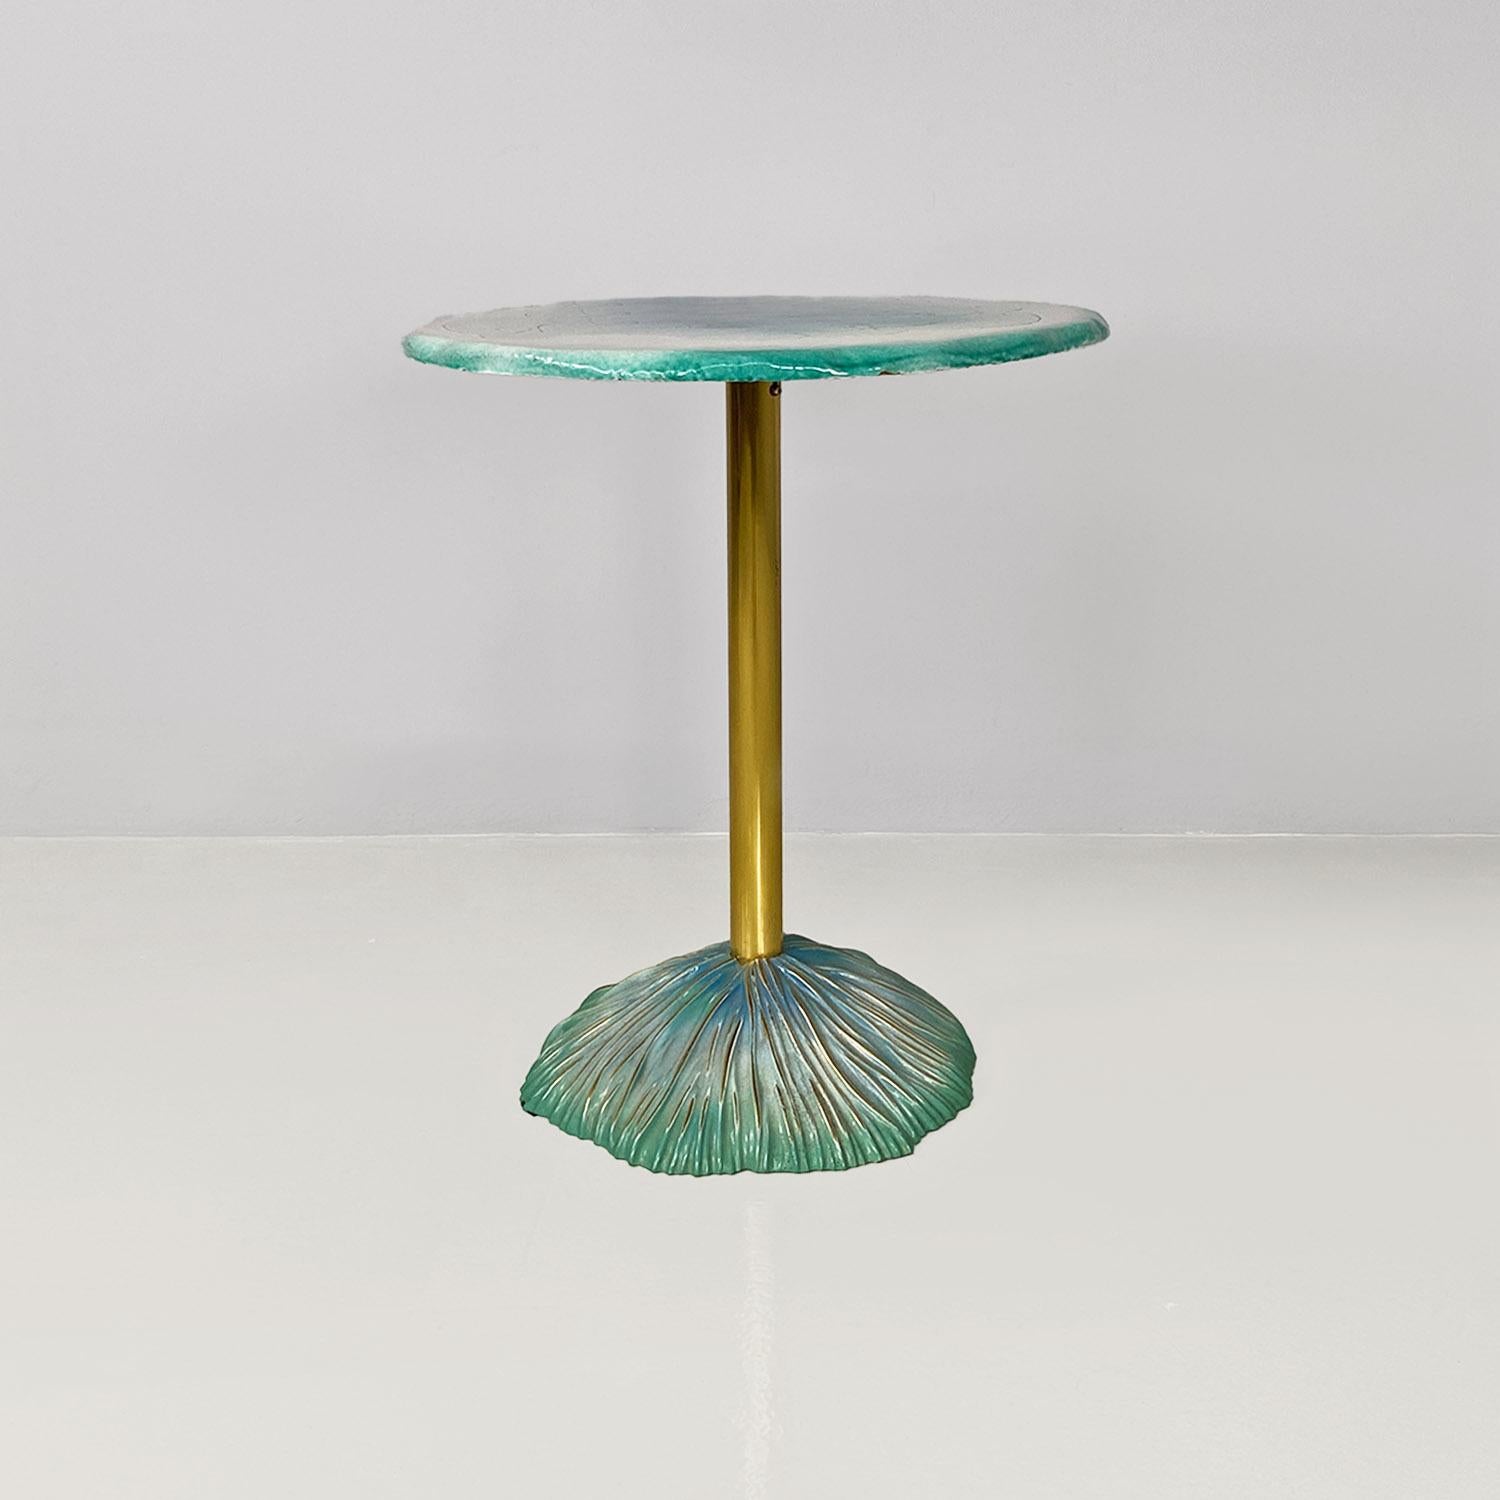 Italian post modern small round white, gold and light blue dining table in ceramic with engraved design and brass, probably 1980s period.
Round-shaped dining table, with ceramic top with engraved design and changing colors in shades of blue, white